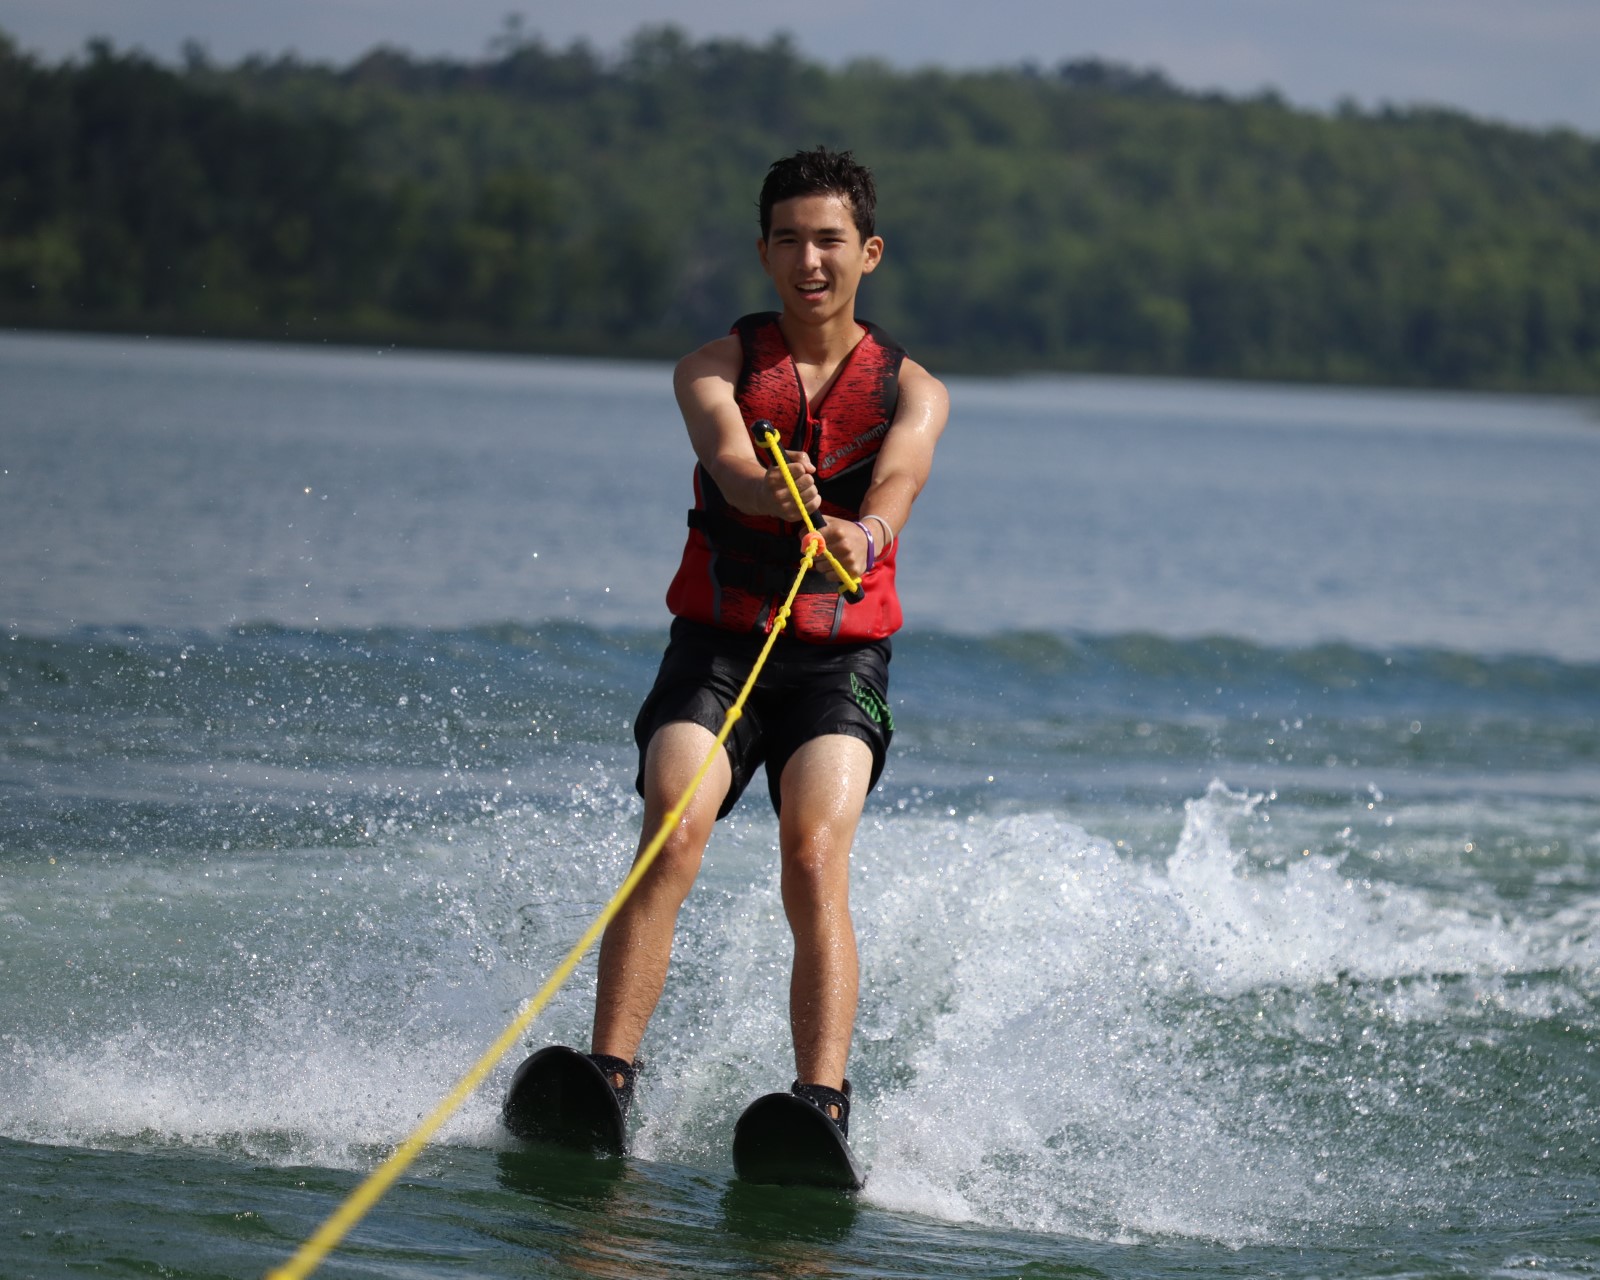 A Scout smiling while waterskiing